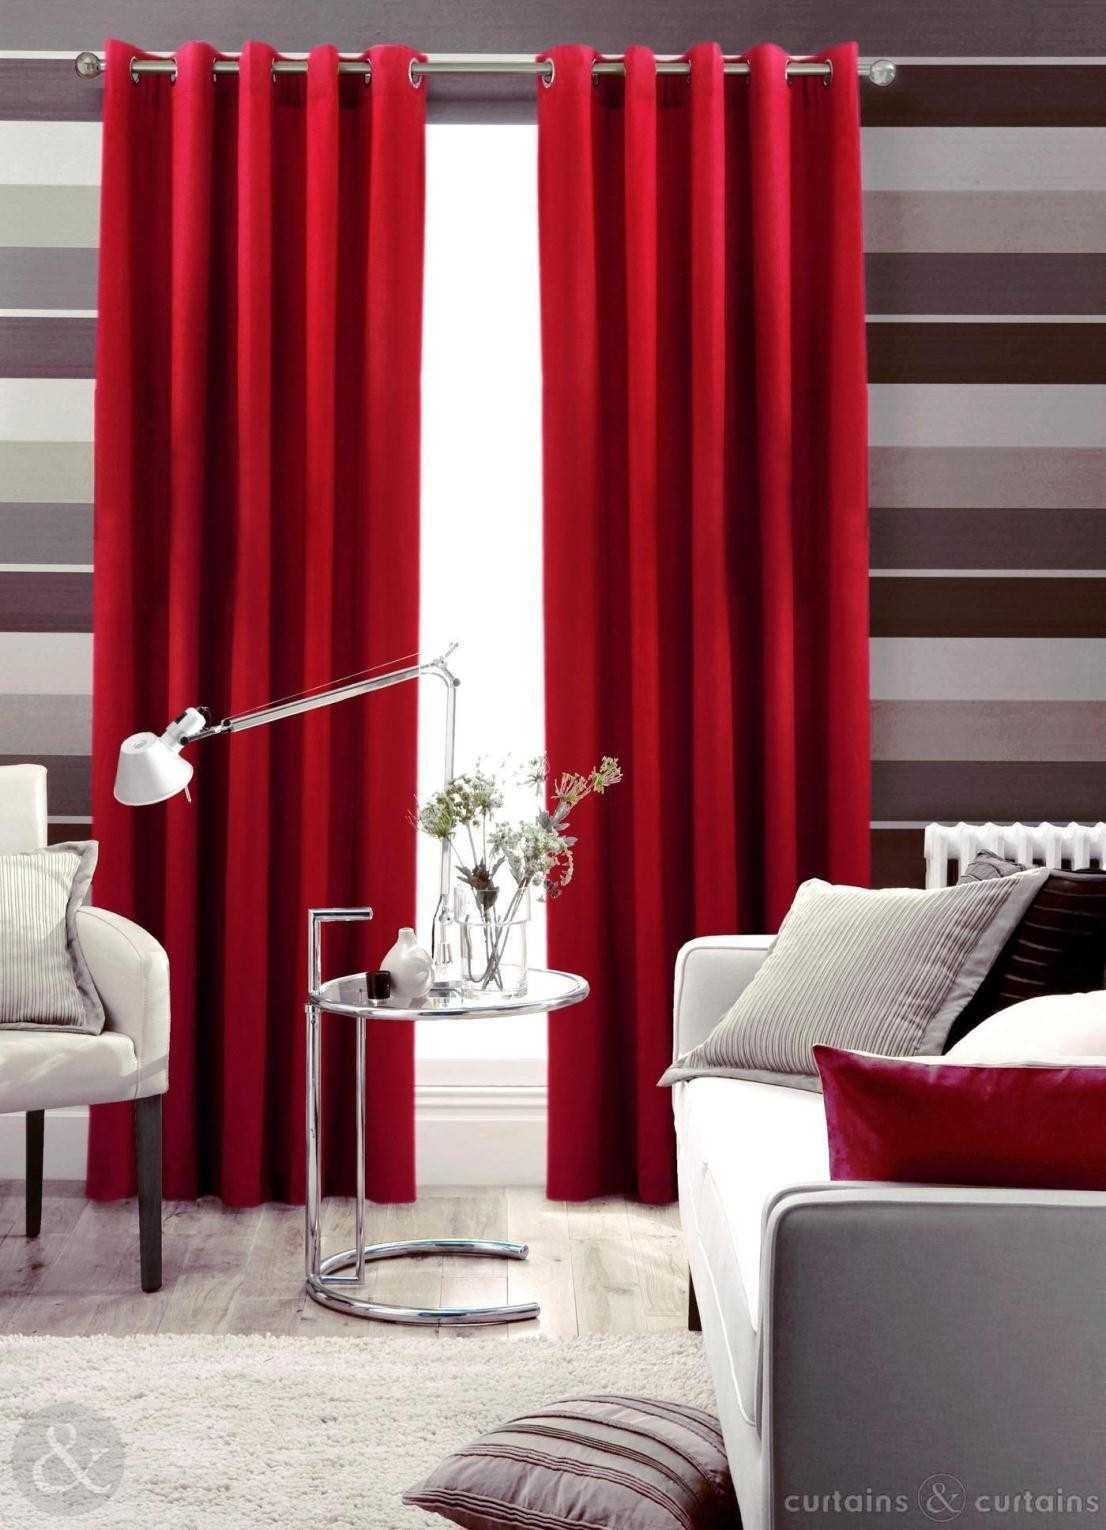 25 Wonderful Red Curtains for Living Room - Home, Family ...